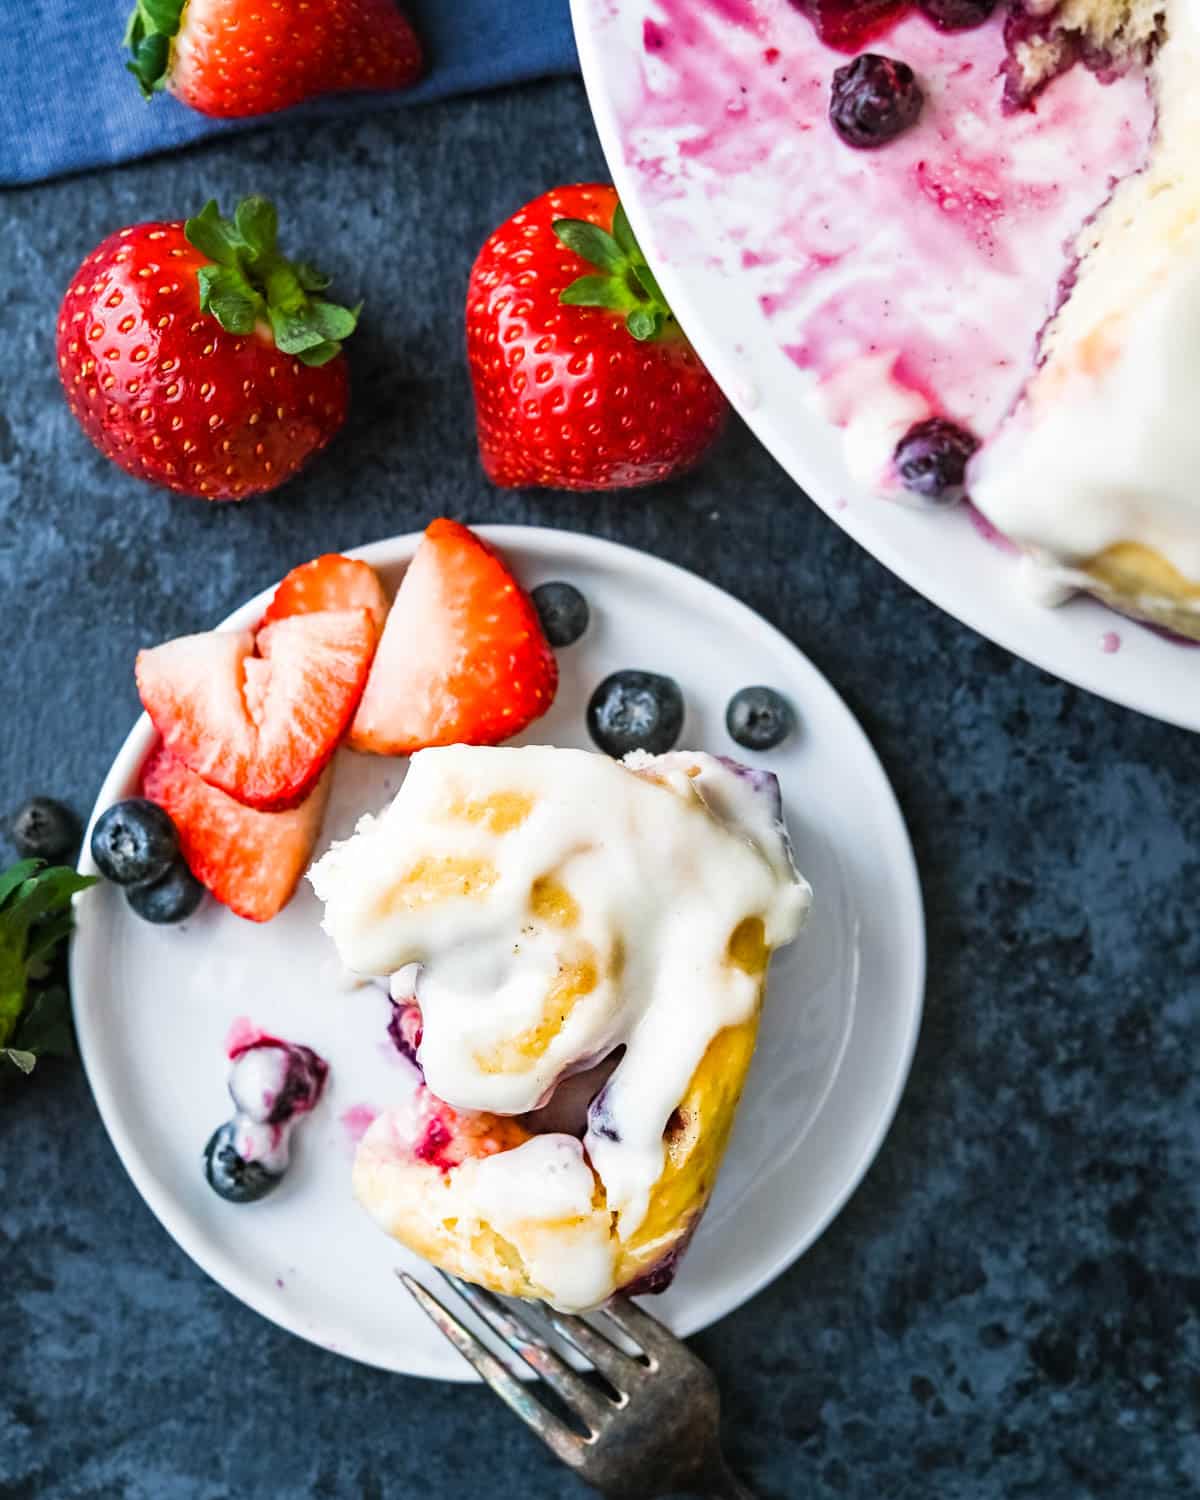 lemon sweet rolls with blueberries and strawberries on the plate.